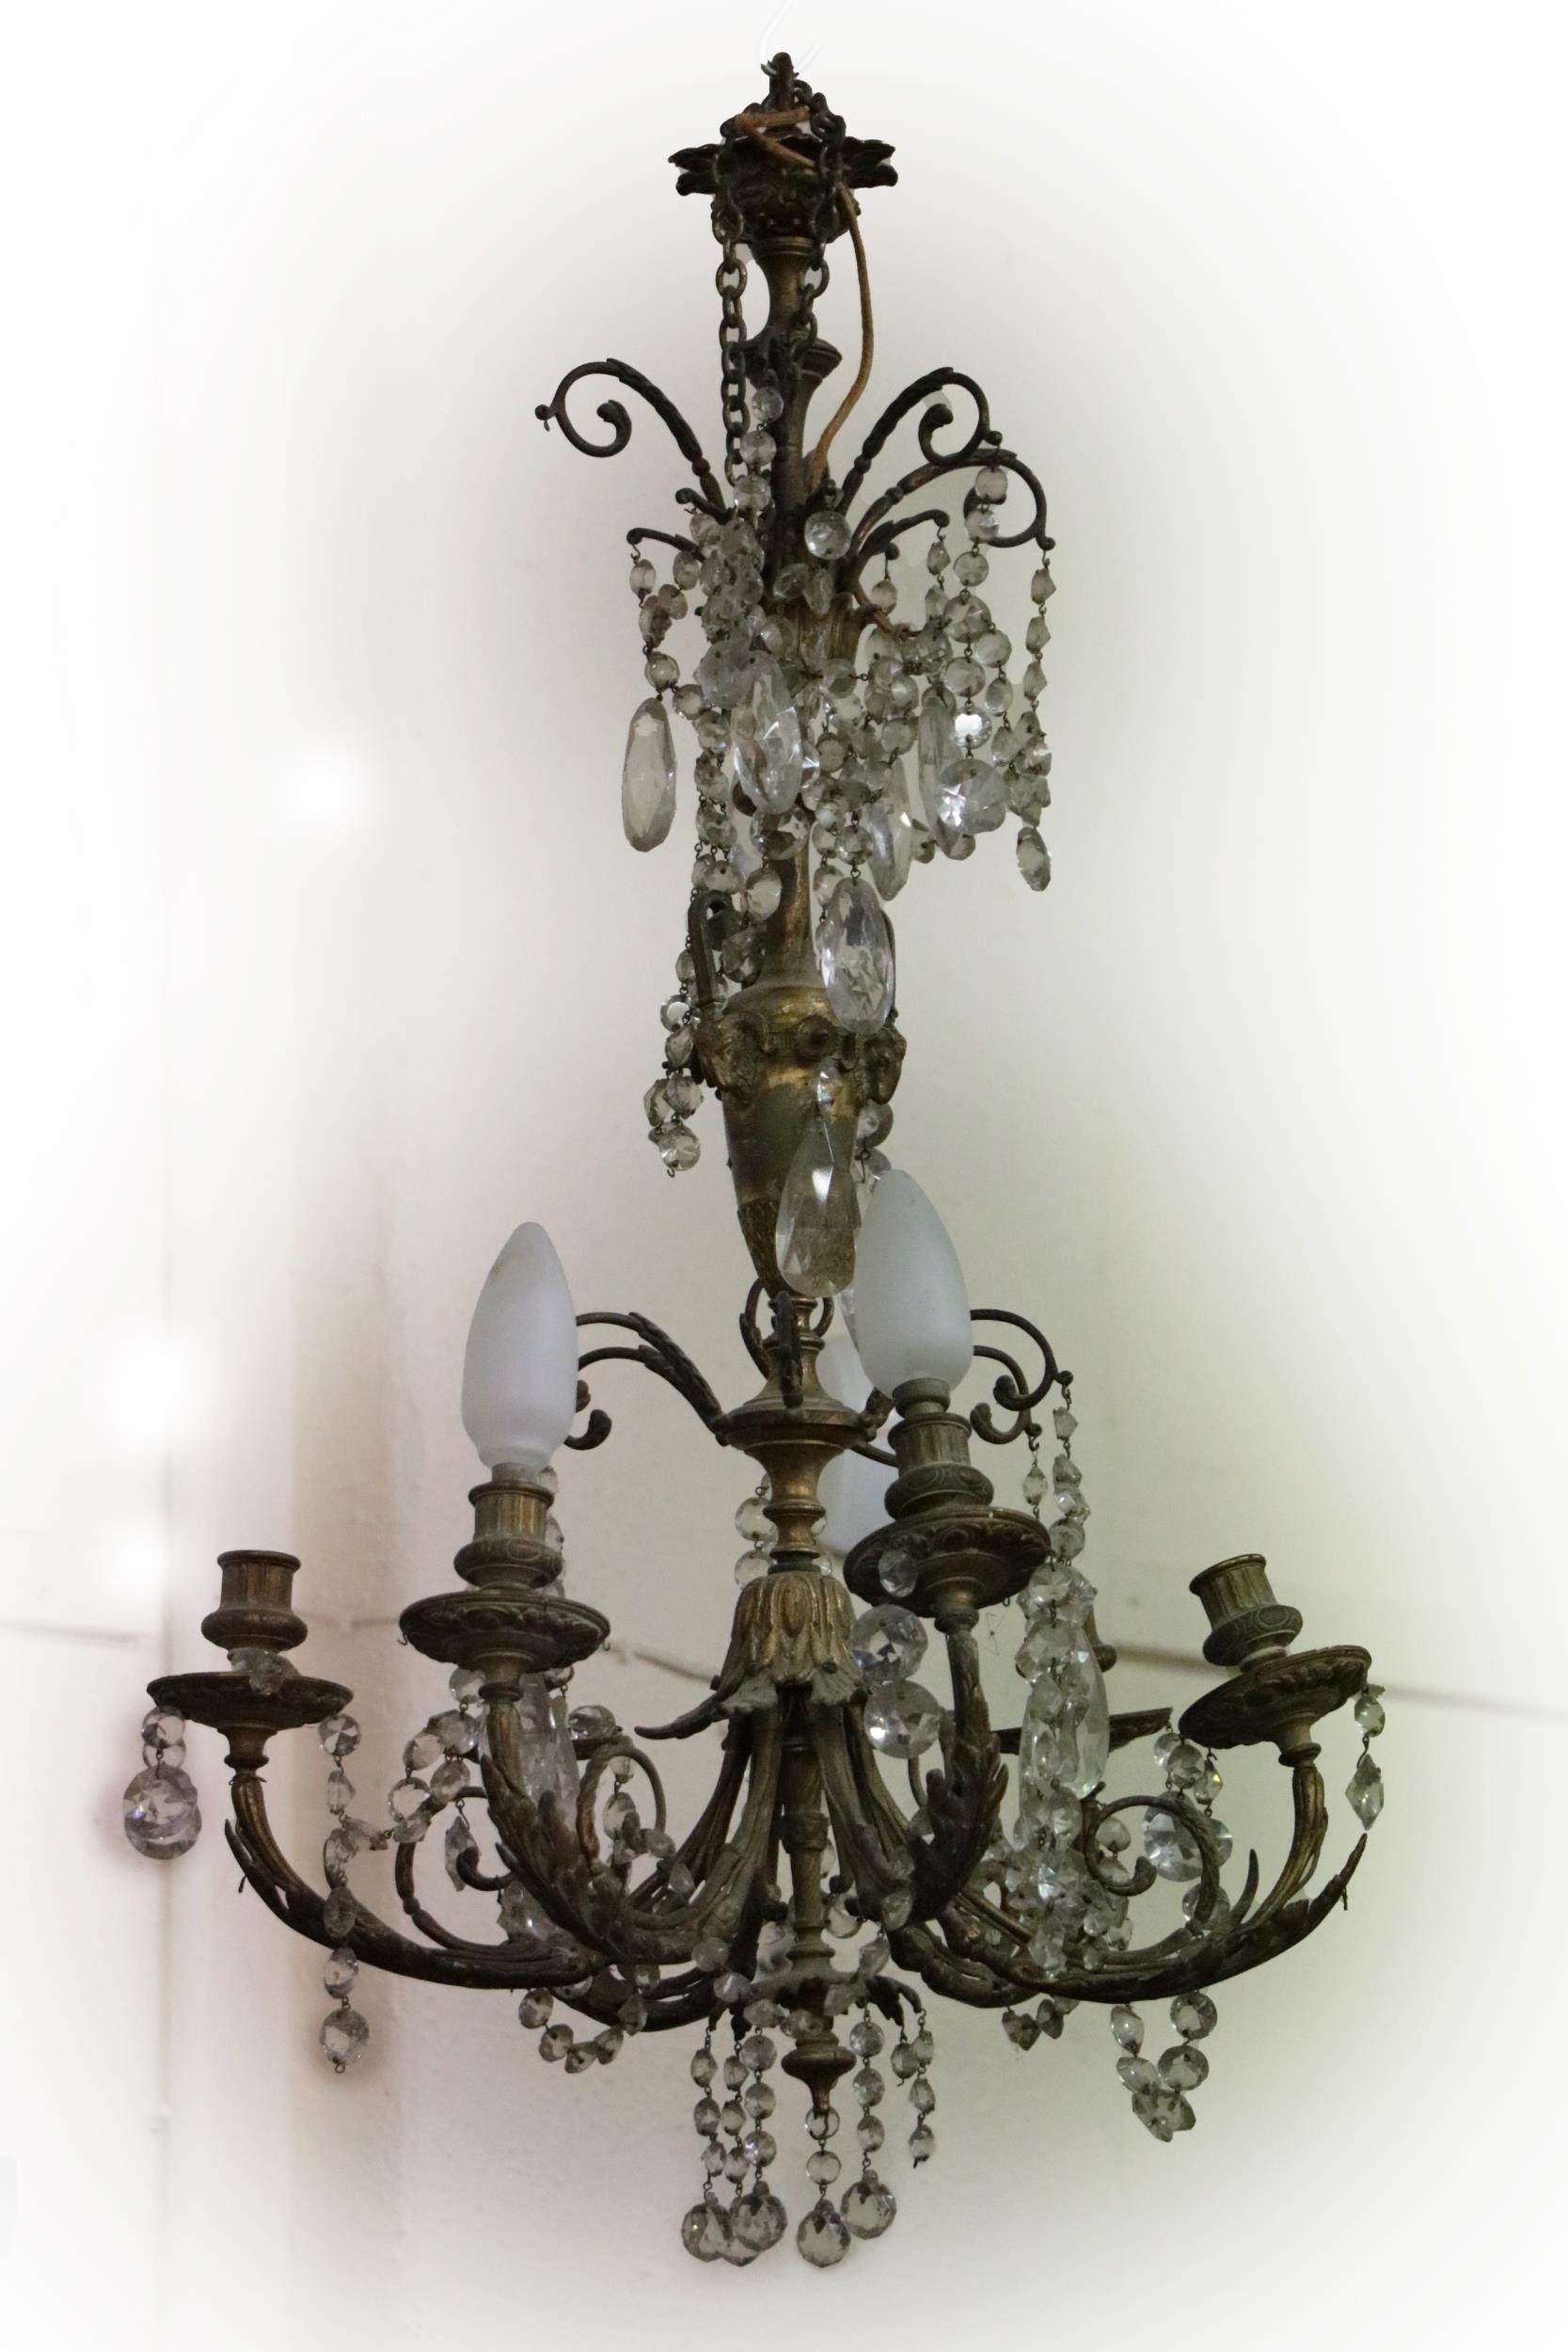 A Regency period six branch ormolu Ceiling Light, with multiple cutglass chains and drops, approx.